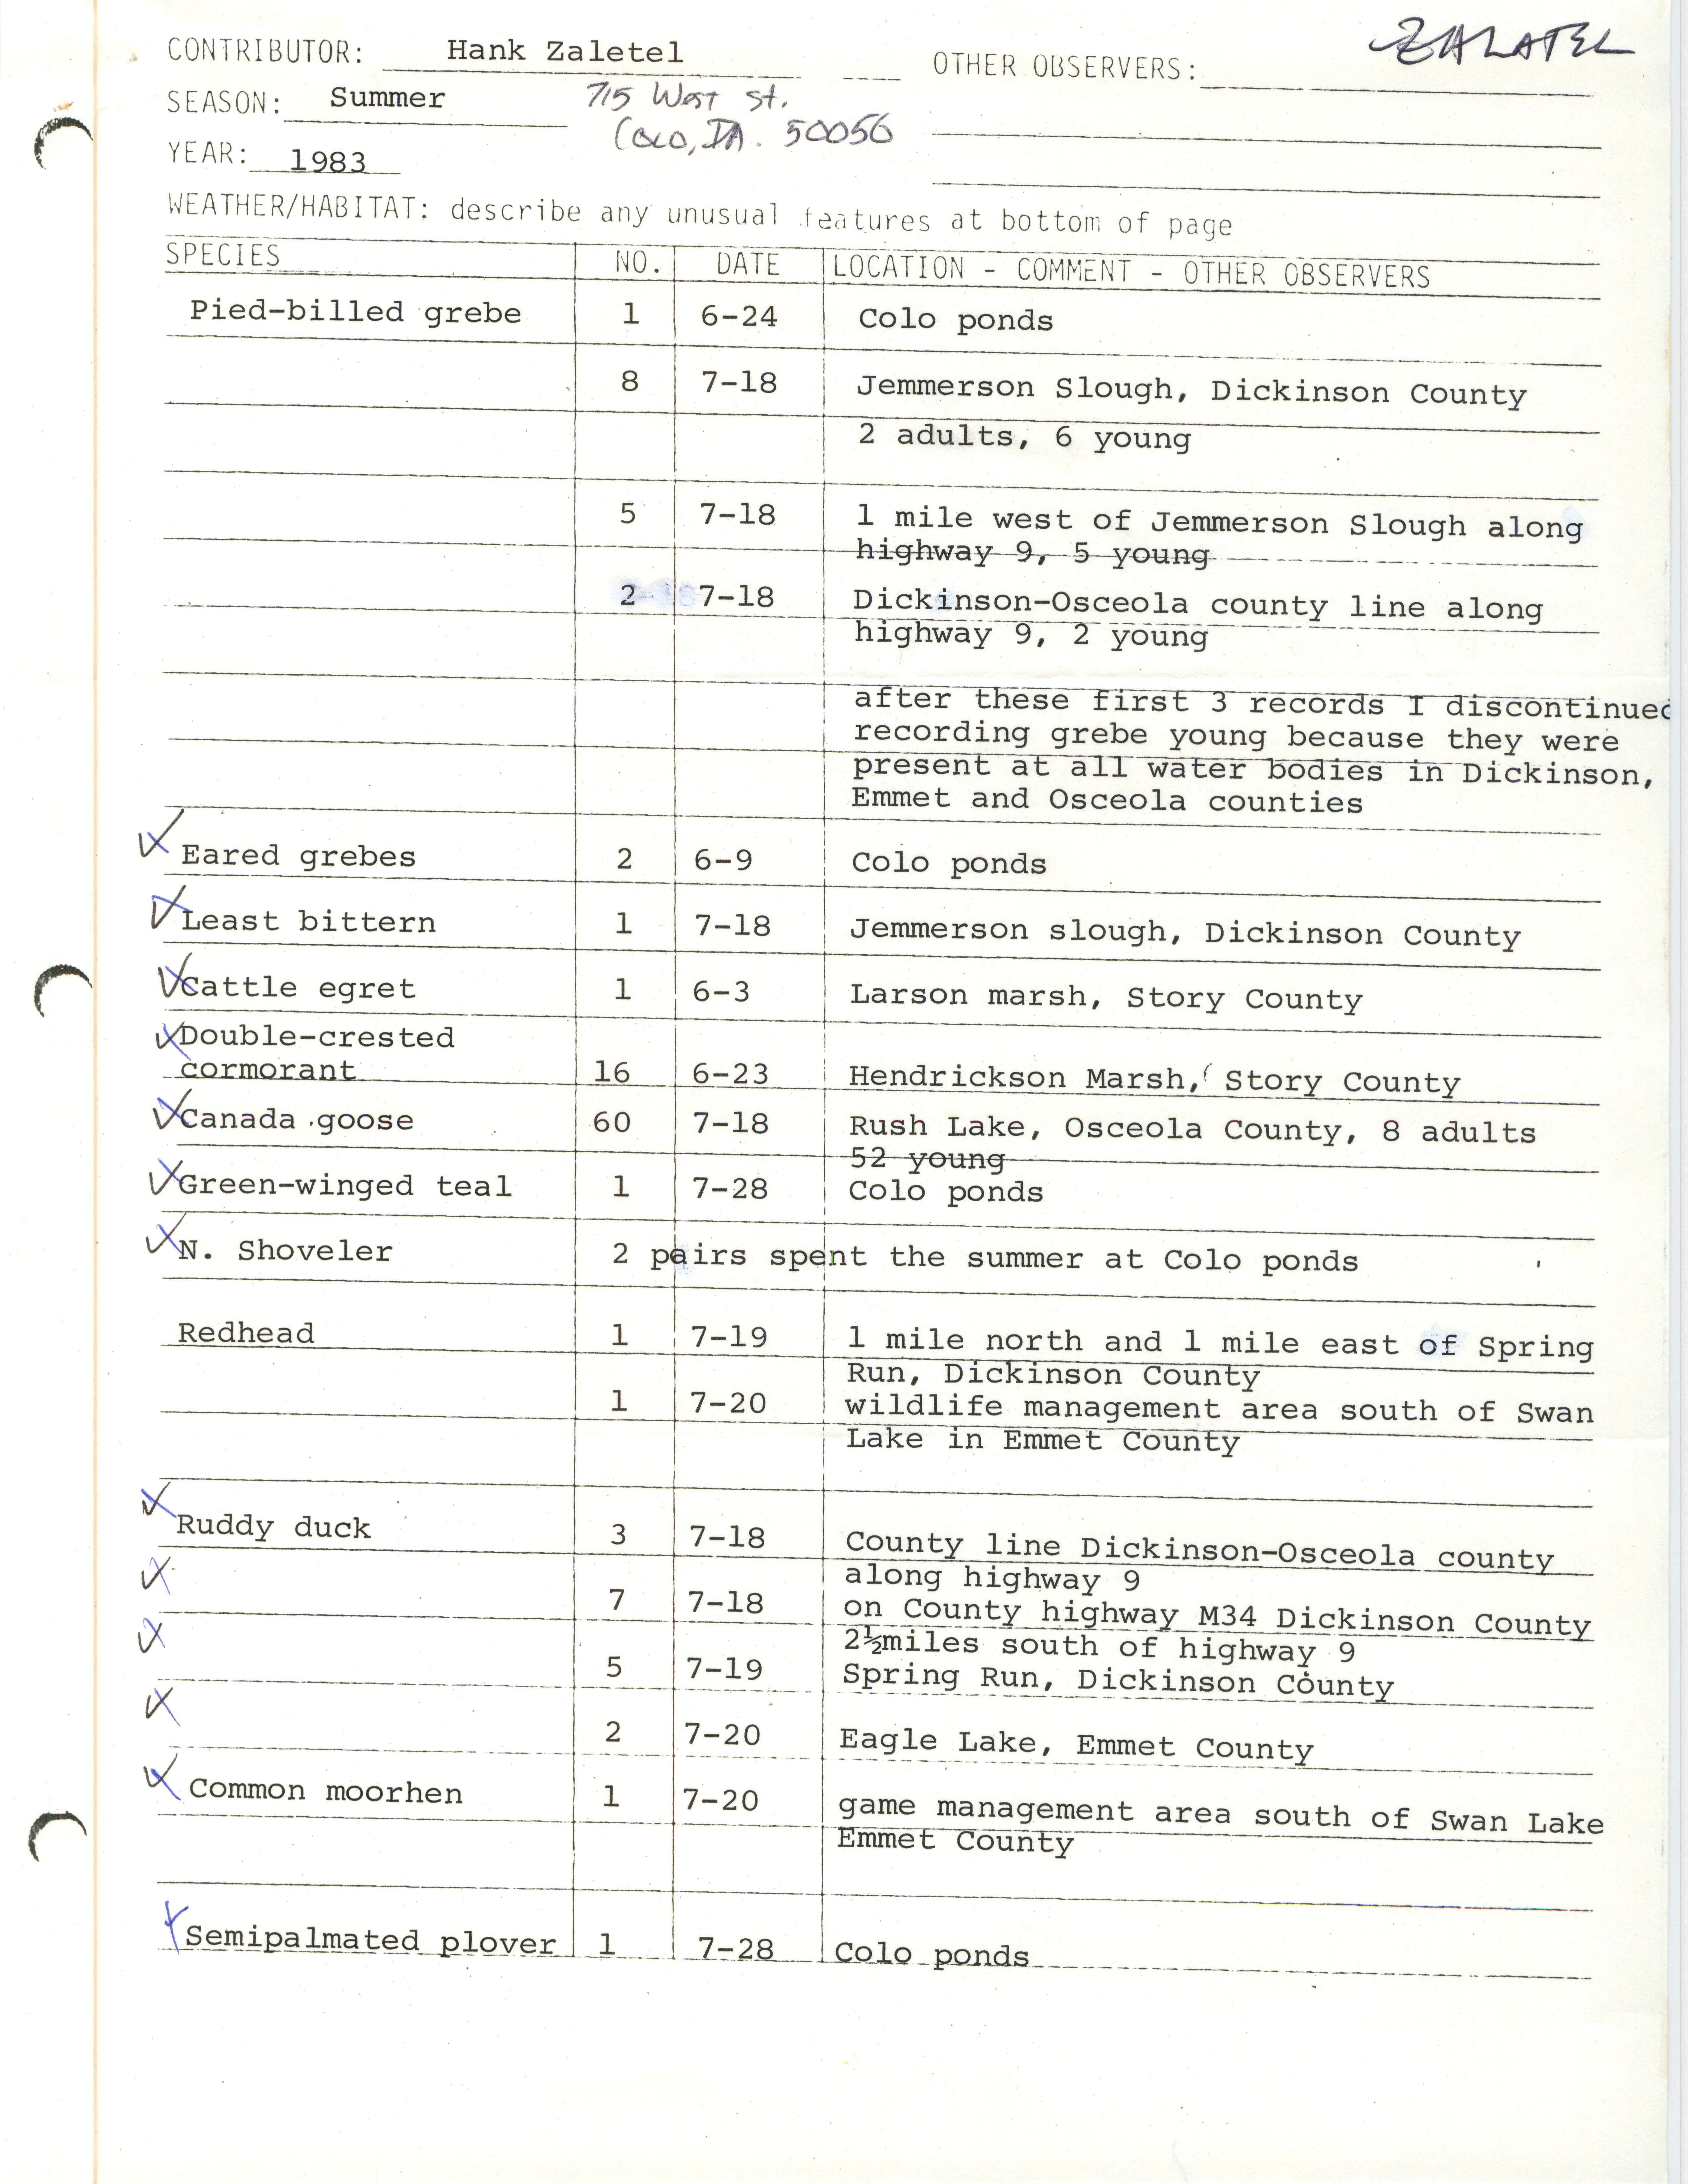 Annotated bird sighting list for Summer 1983 compiled by Hank Zaletel